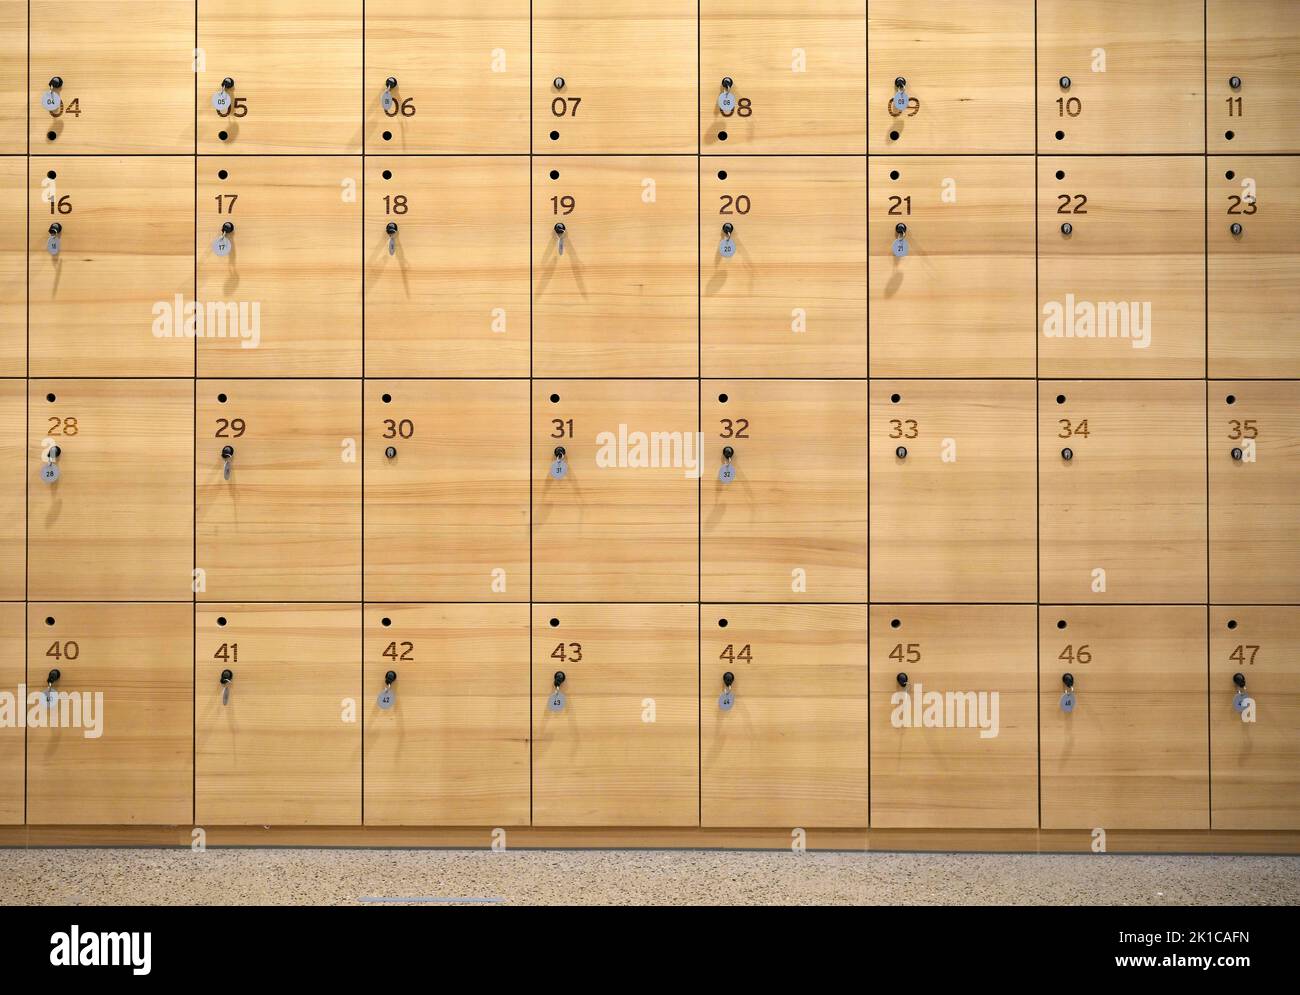 Orlando,FL/USA-8/30/20: The lockers outside Harry Potter and the